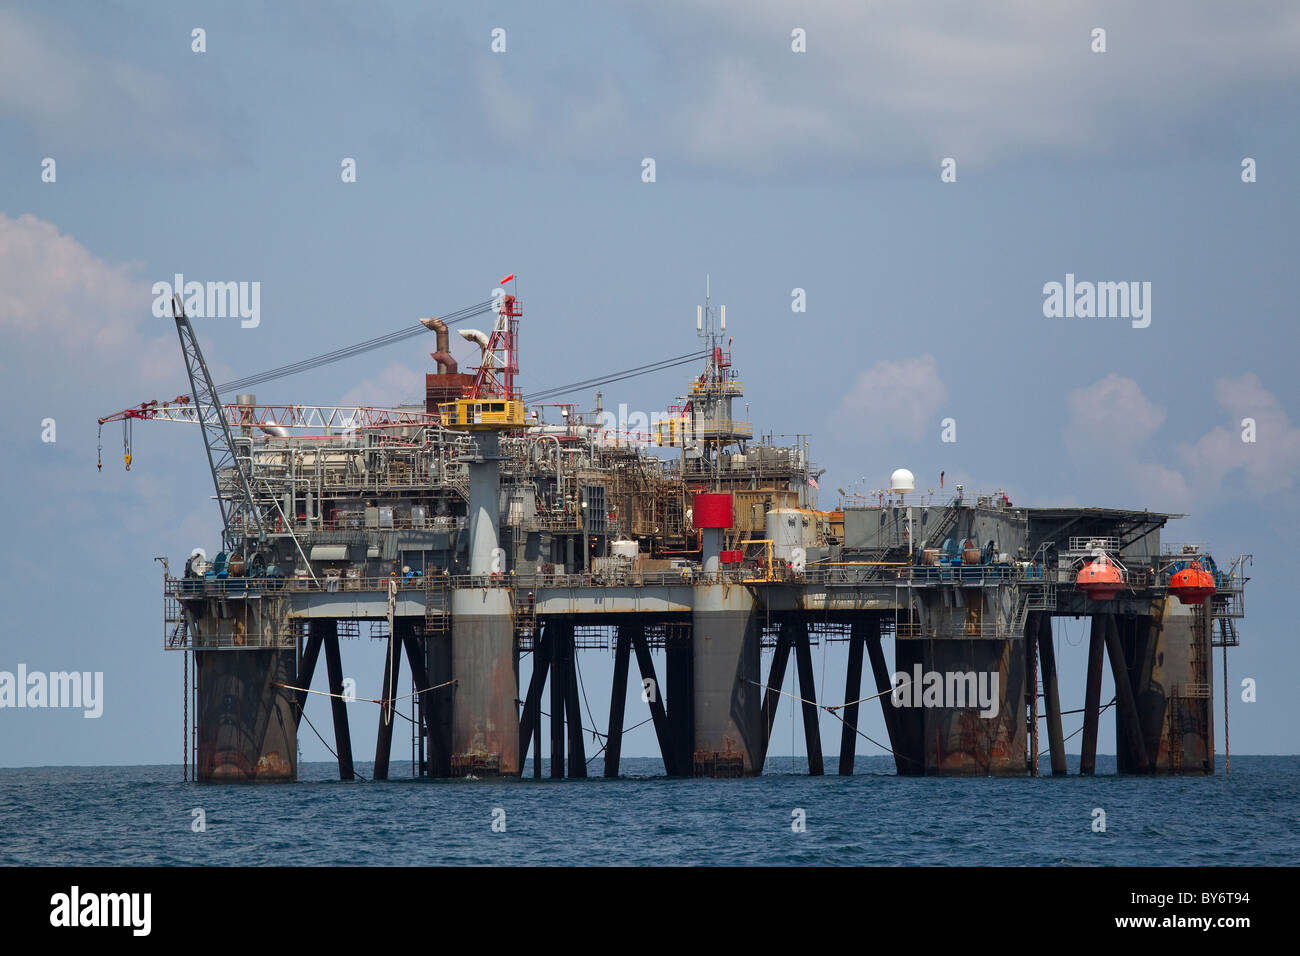 Large offshore oil rig platform in Gulf of Mexico Stock Photo